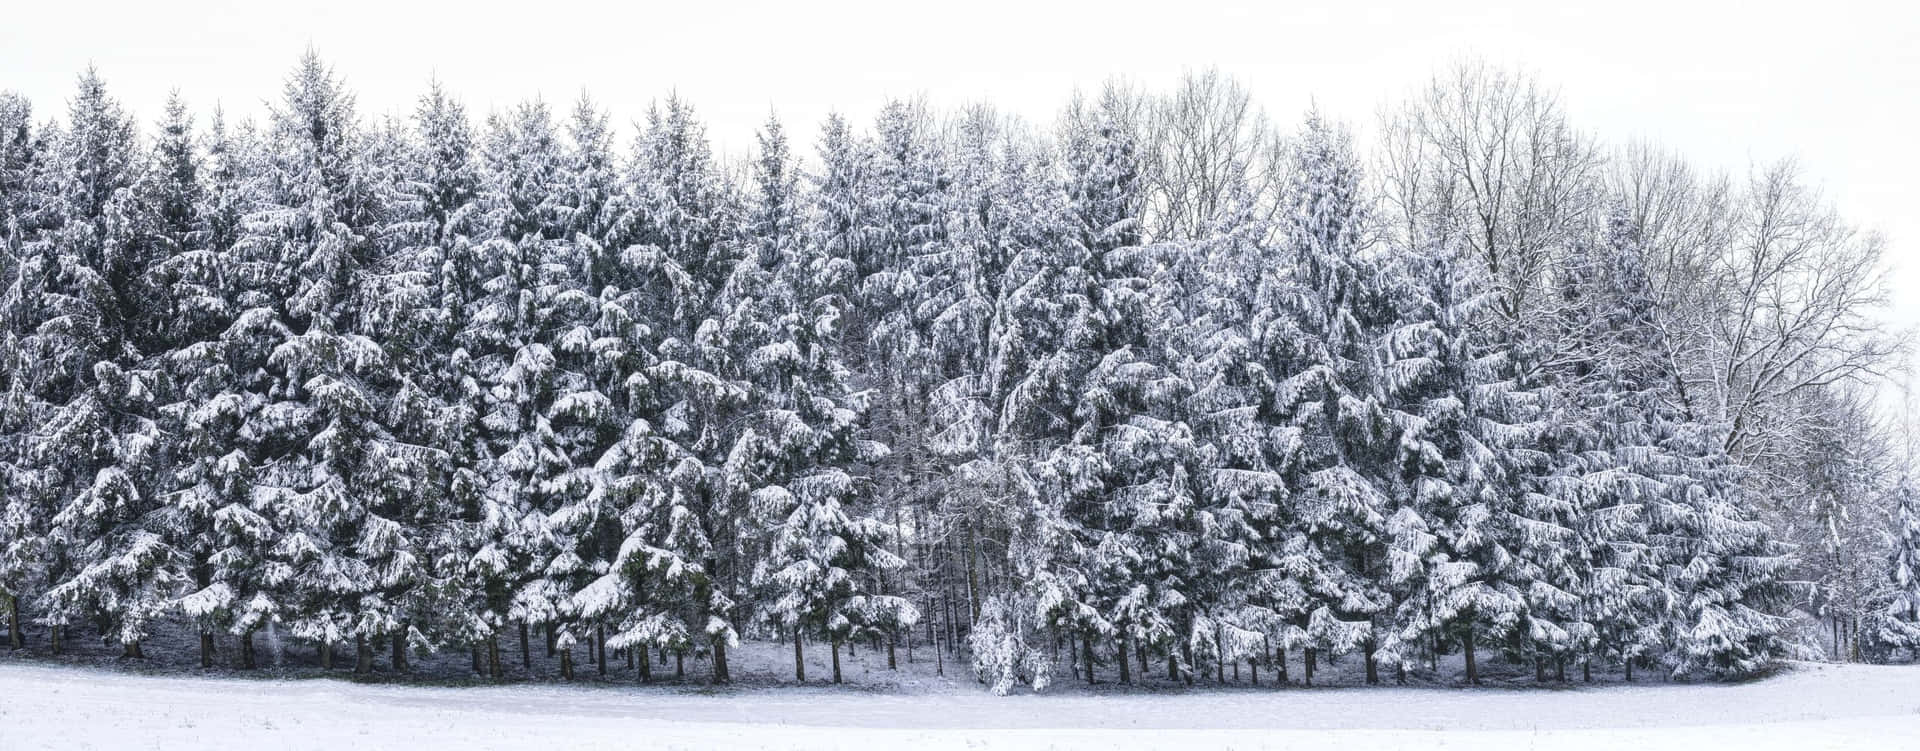 Majestic snow-covered trees in the serene winter landscape Wallpaper